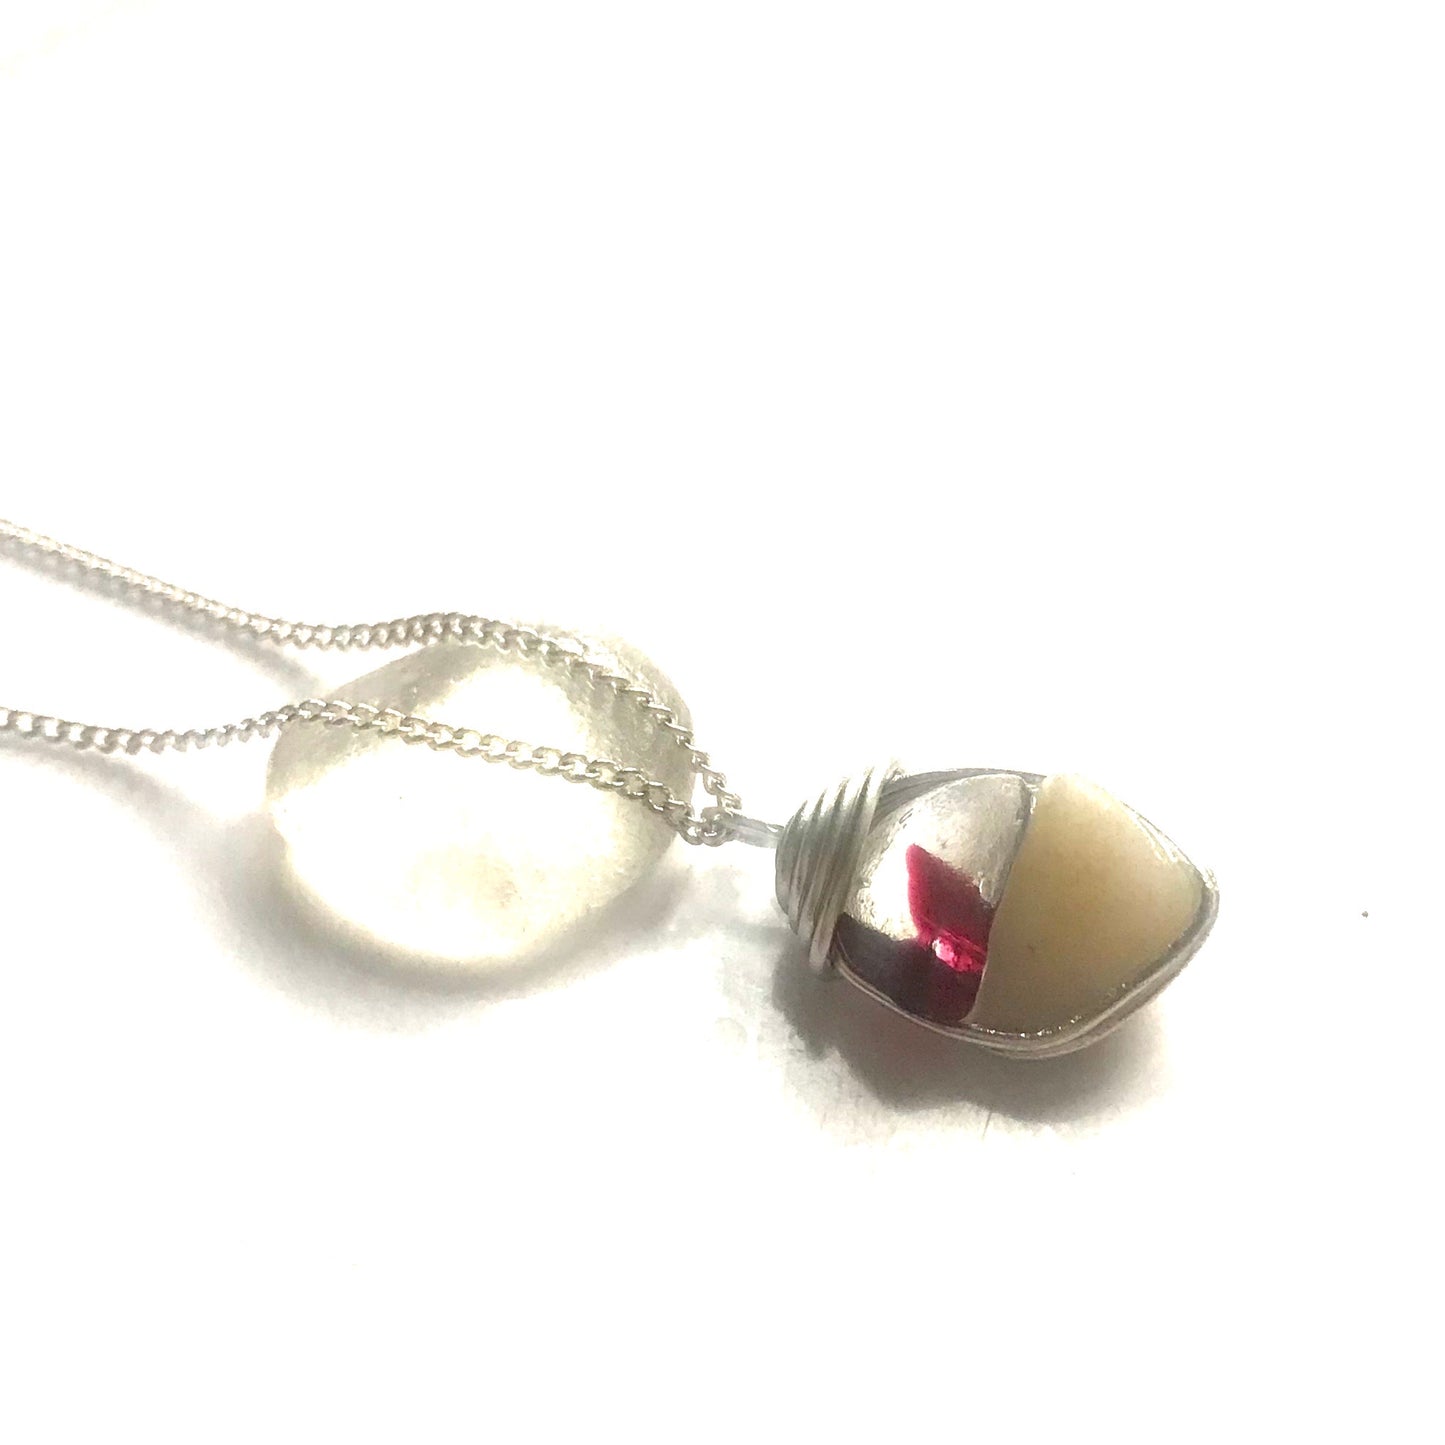 Red Flash Seaham Sea Glass and Pebble Pendant